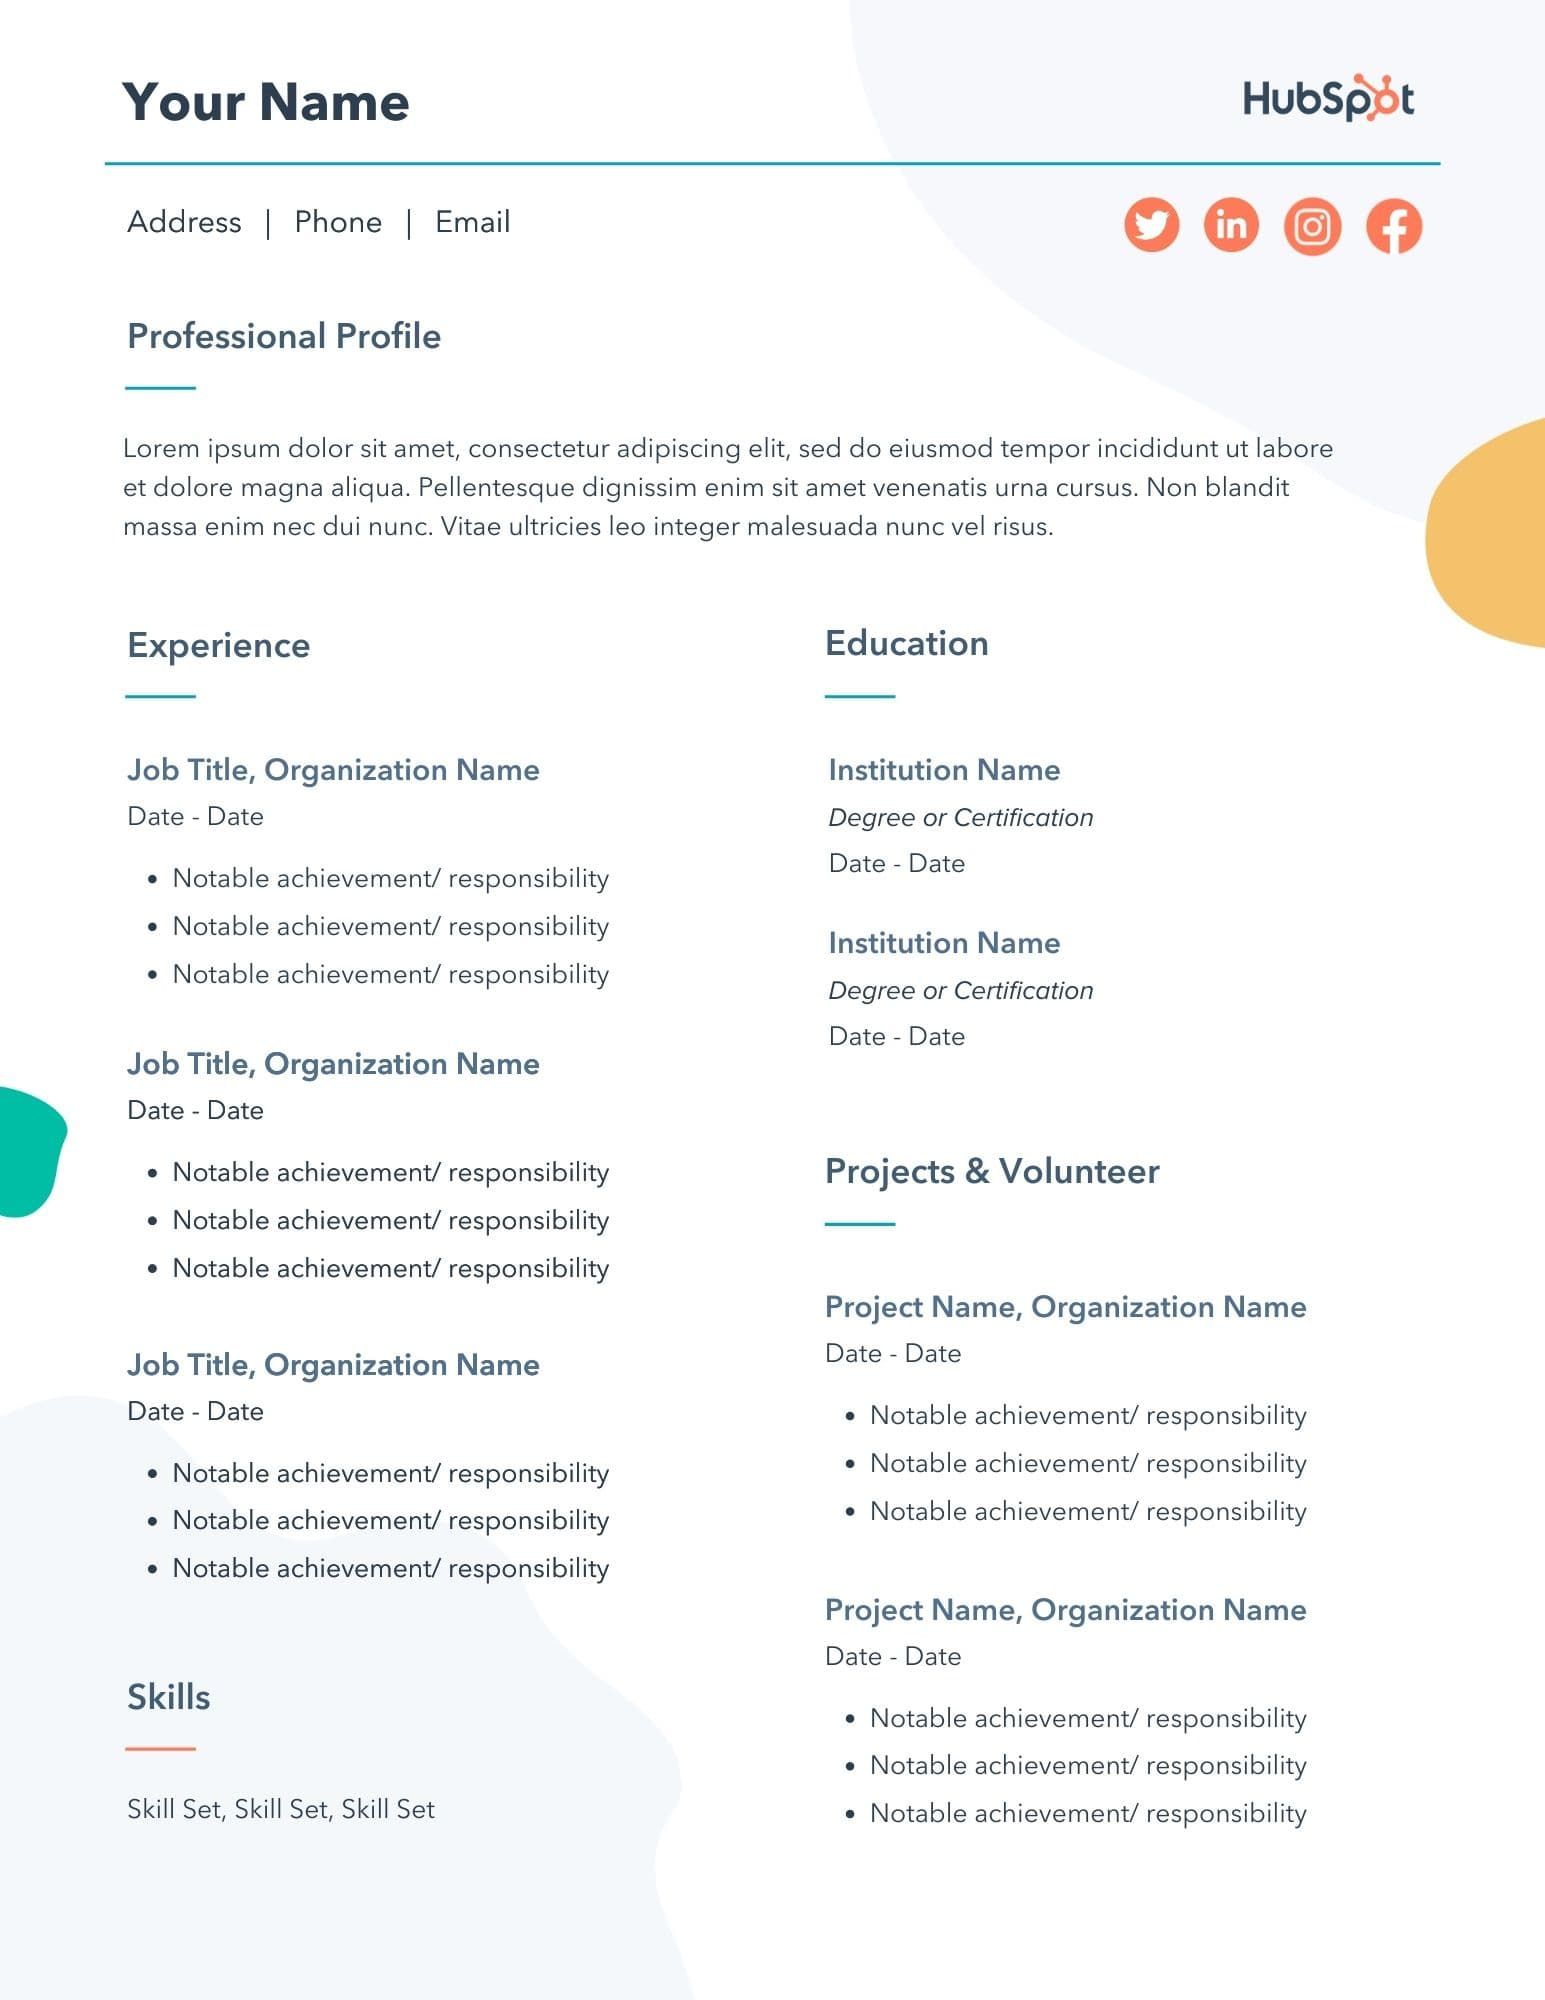 29 Free Resume Templates for Microsoft Word (&  How to Make Your Own) in ...